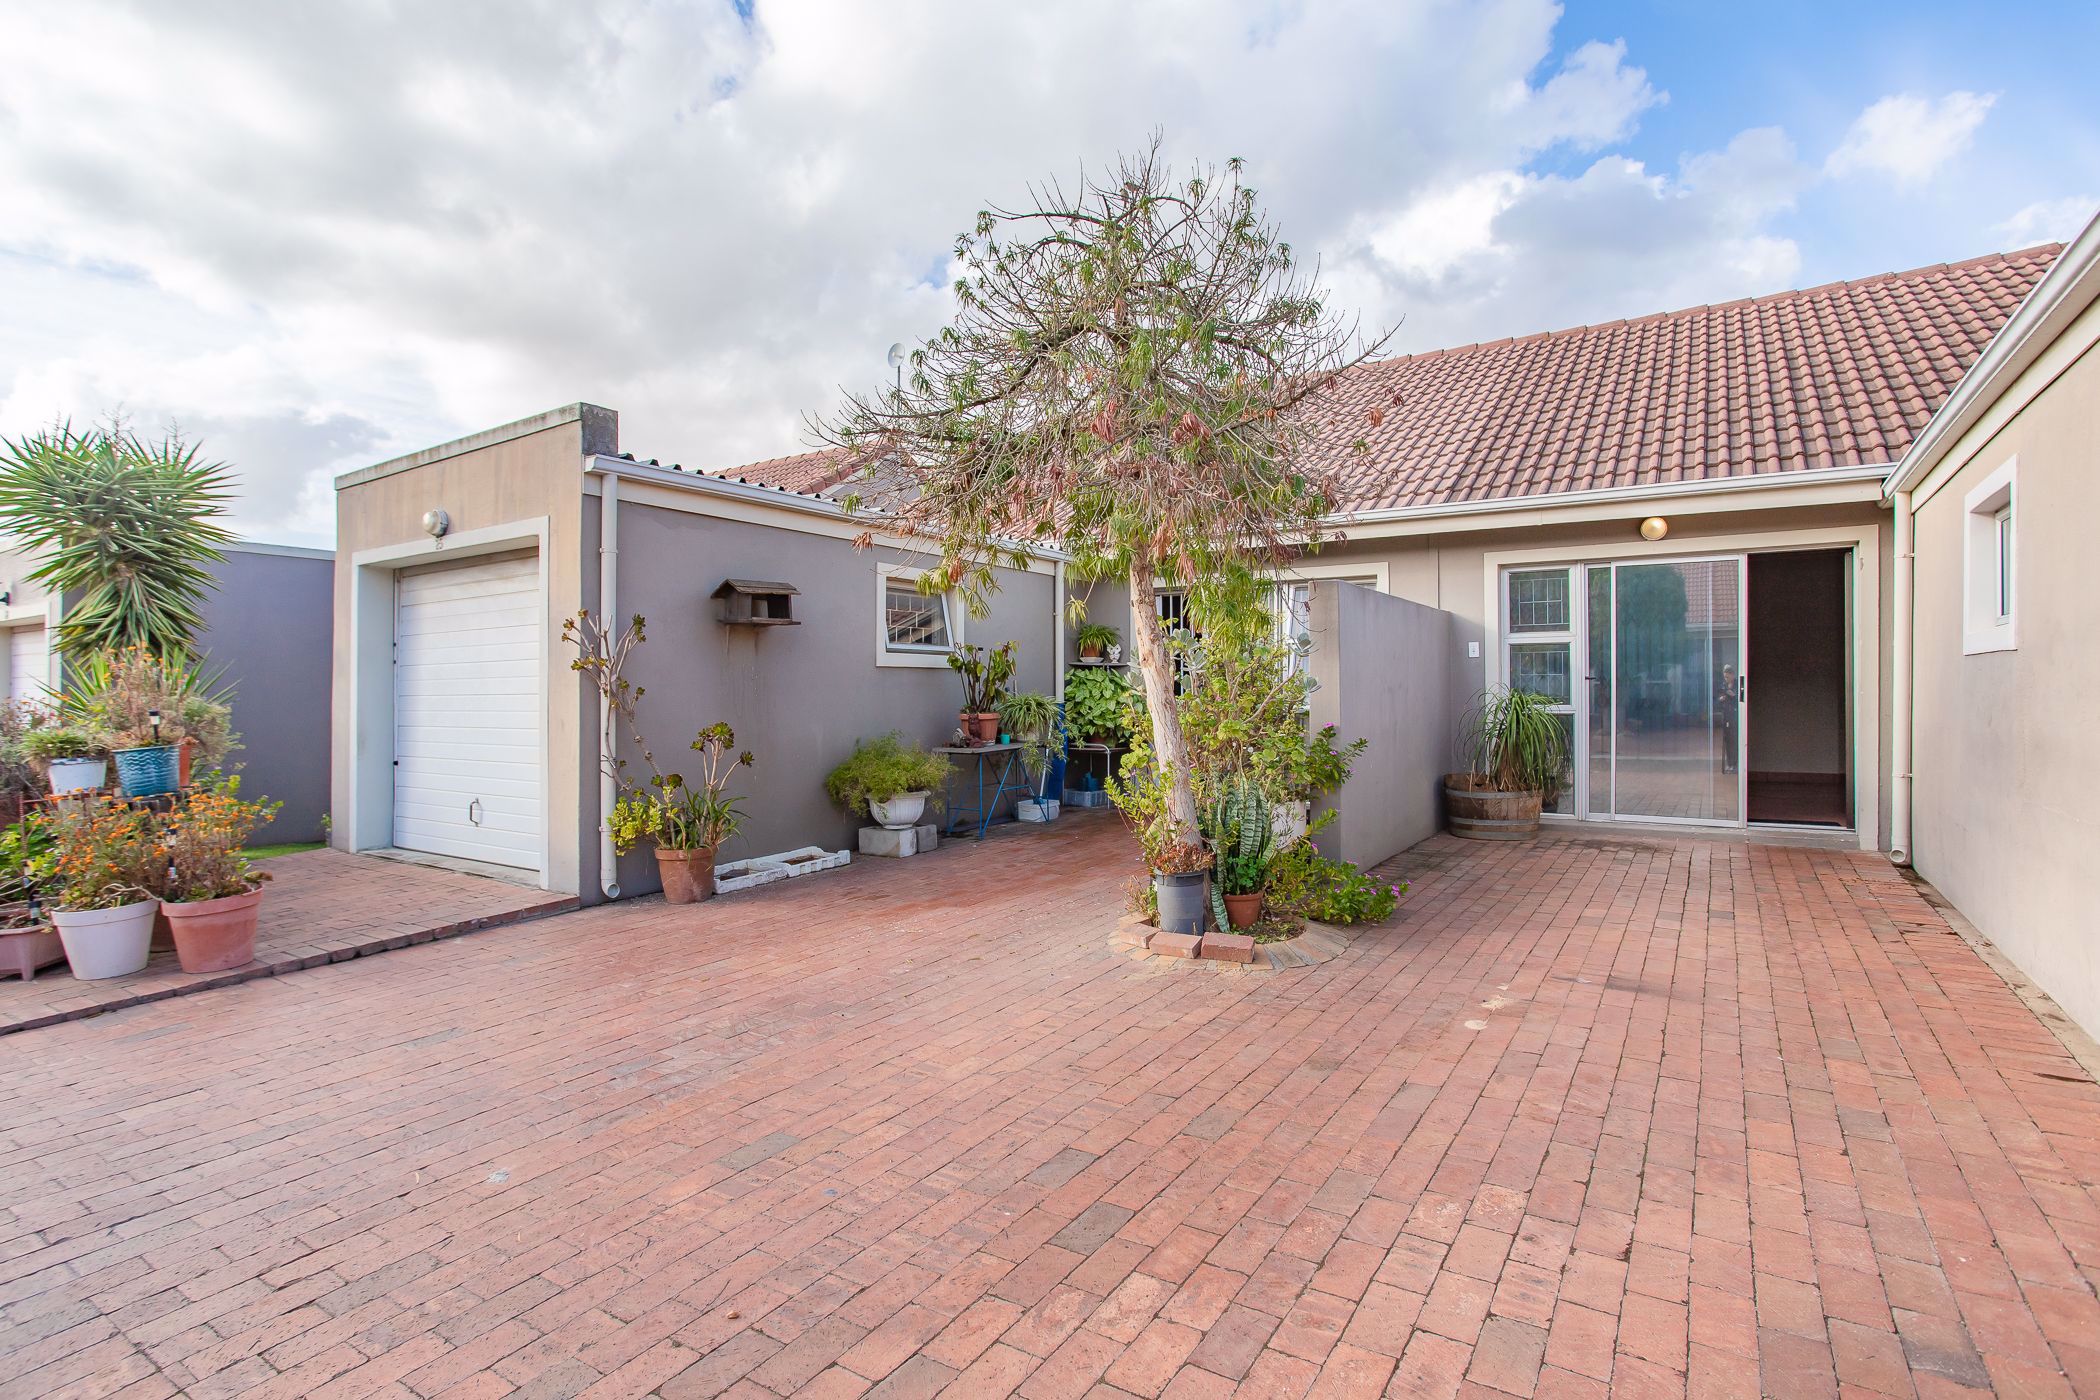 2 bedroom house for sale in Paarl